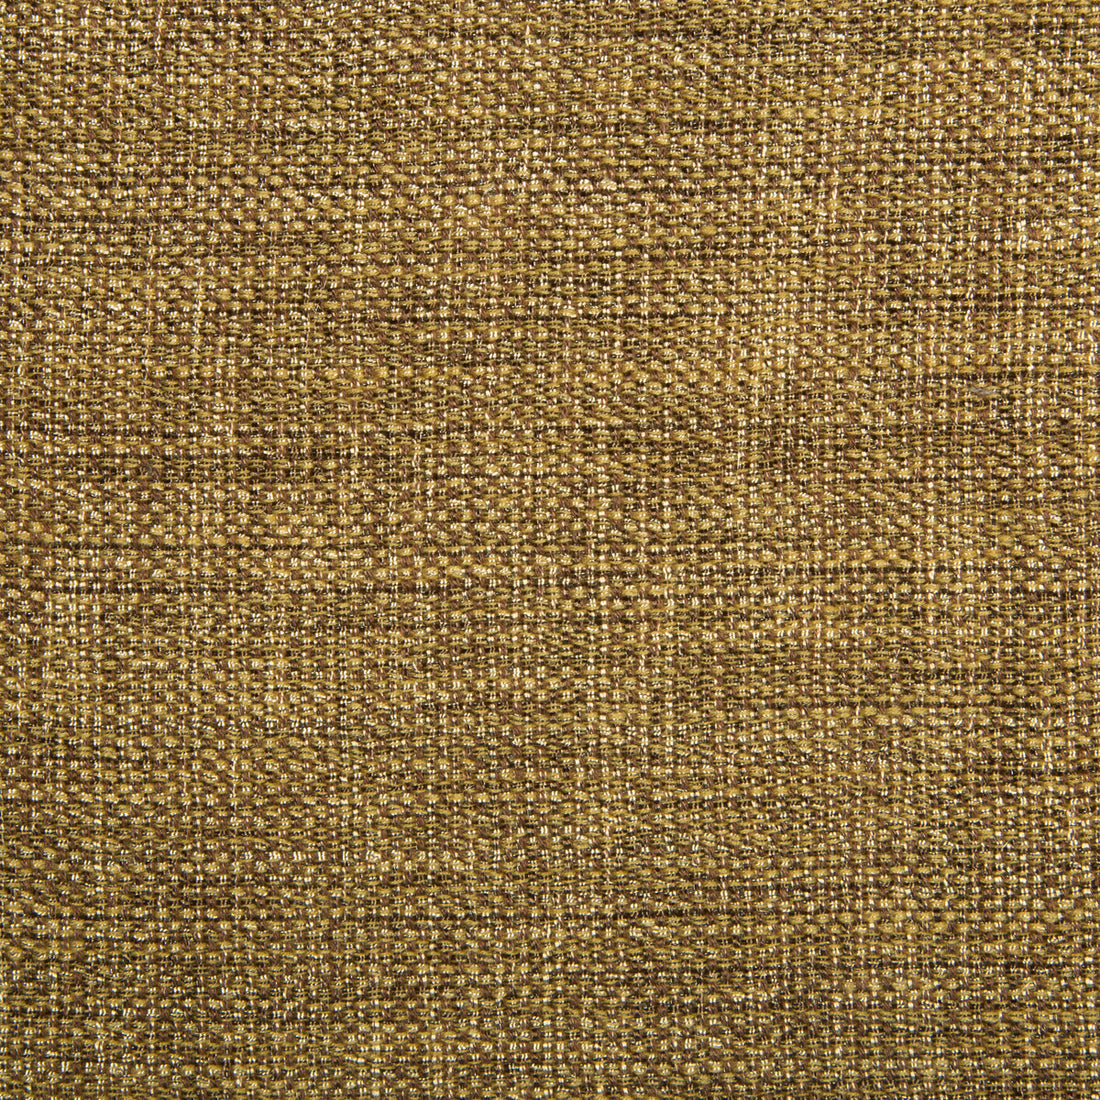 Kravet Contract fabric in 4458-616 color - pattern 4458.616.0 - by Kravet Contract